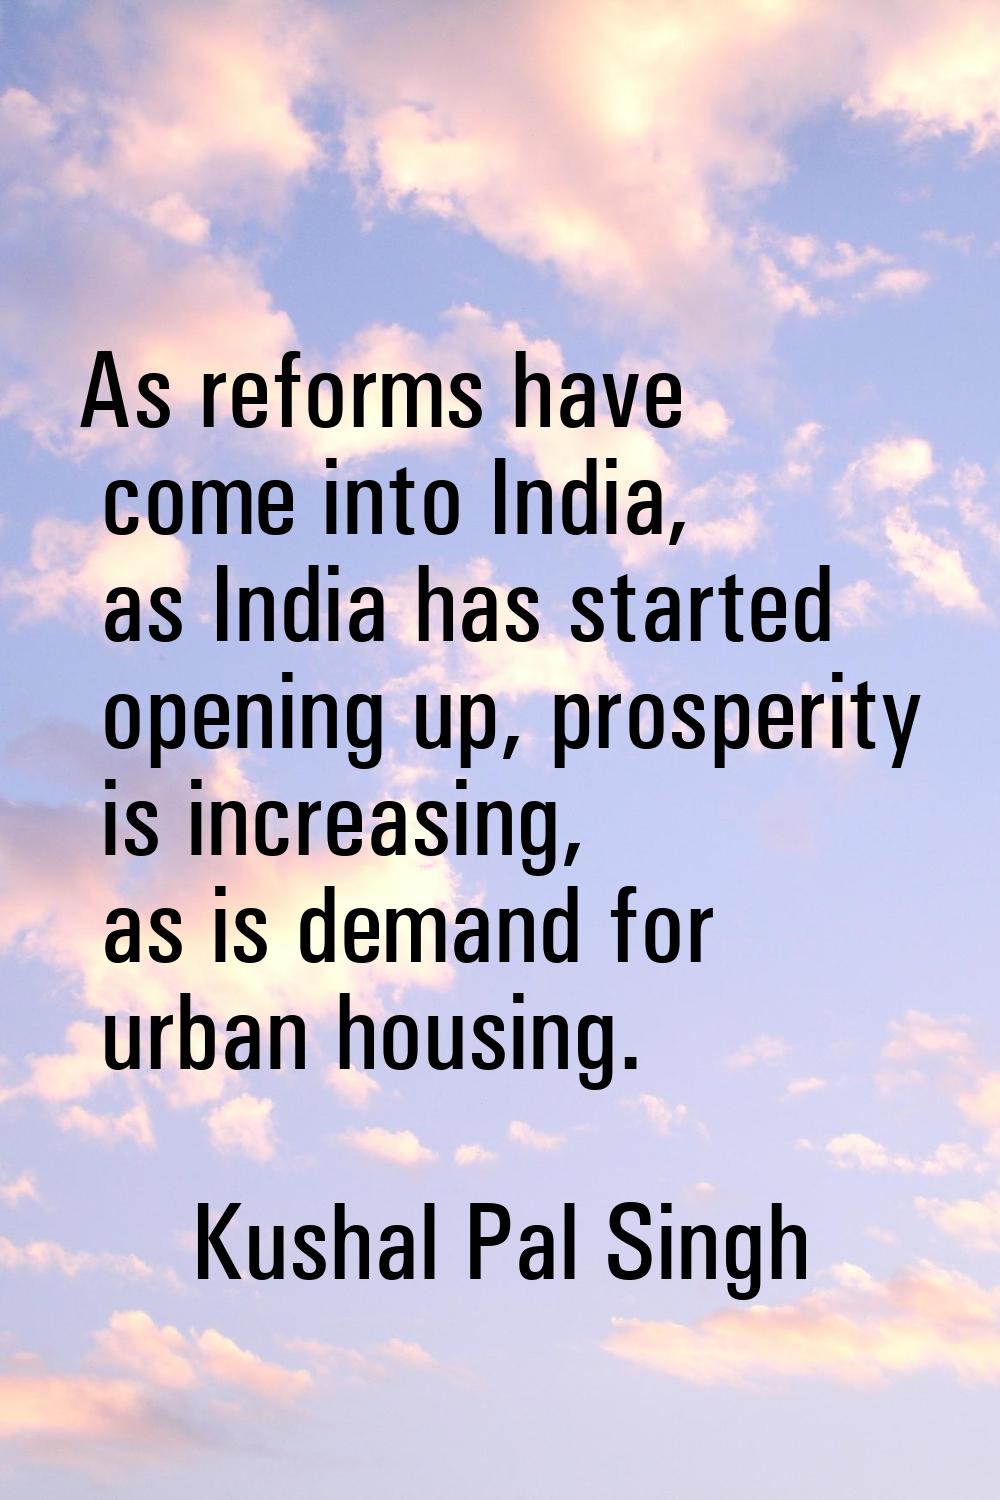 As reforms have come into India, as India has started opening up, prosperity is increasing, as is d